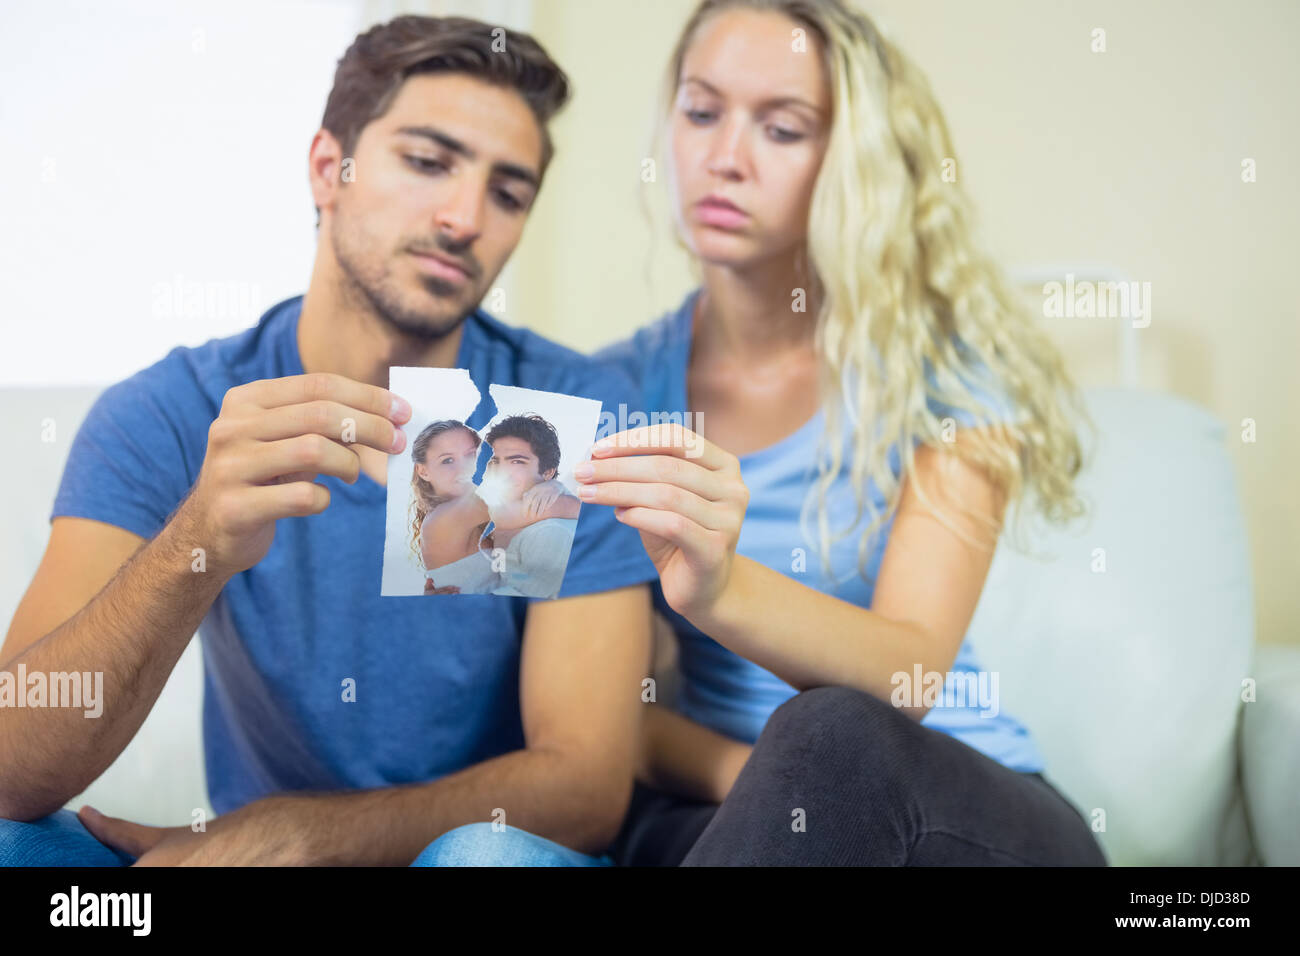 Attractive young couple tearing a picture of them Stock Photo